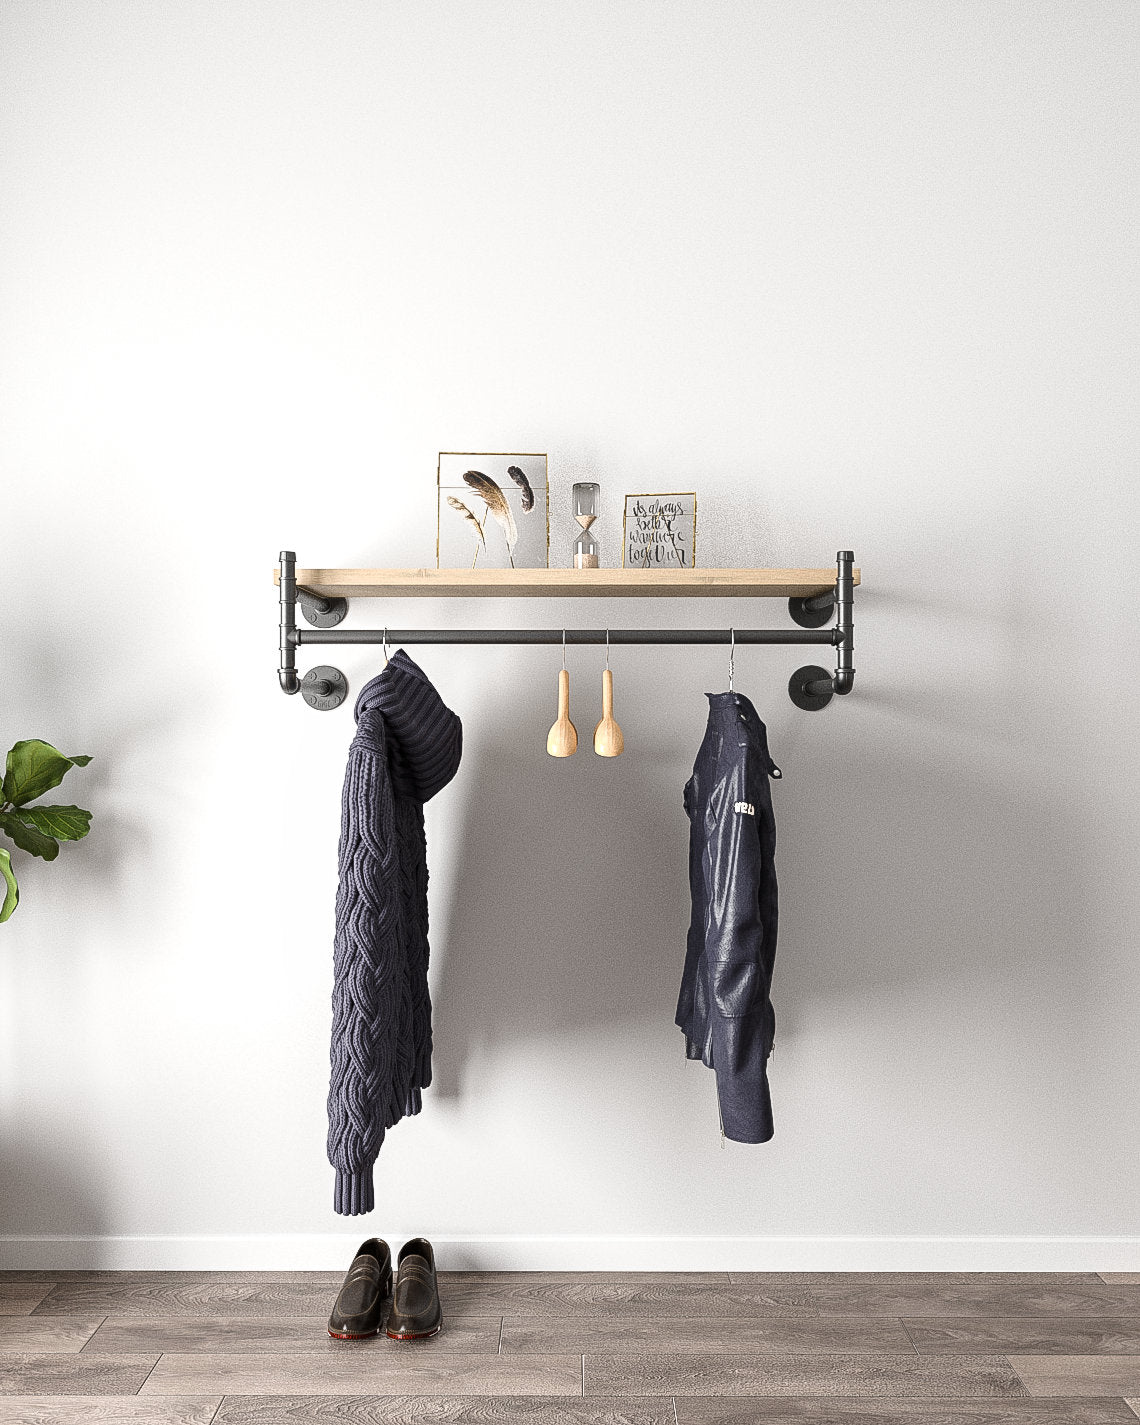 Leor Industrial Pipe Wall Mounted Clothing Rack, showcasing its sturdy malleable iron construction and vintage style